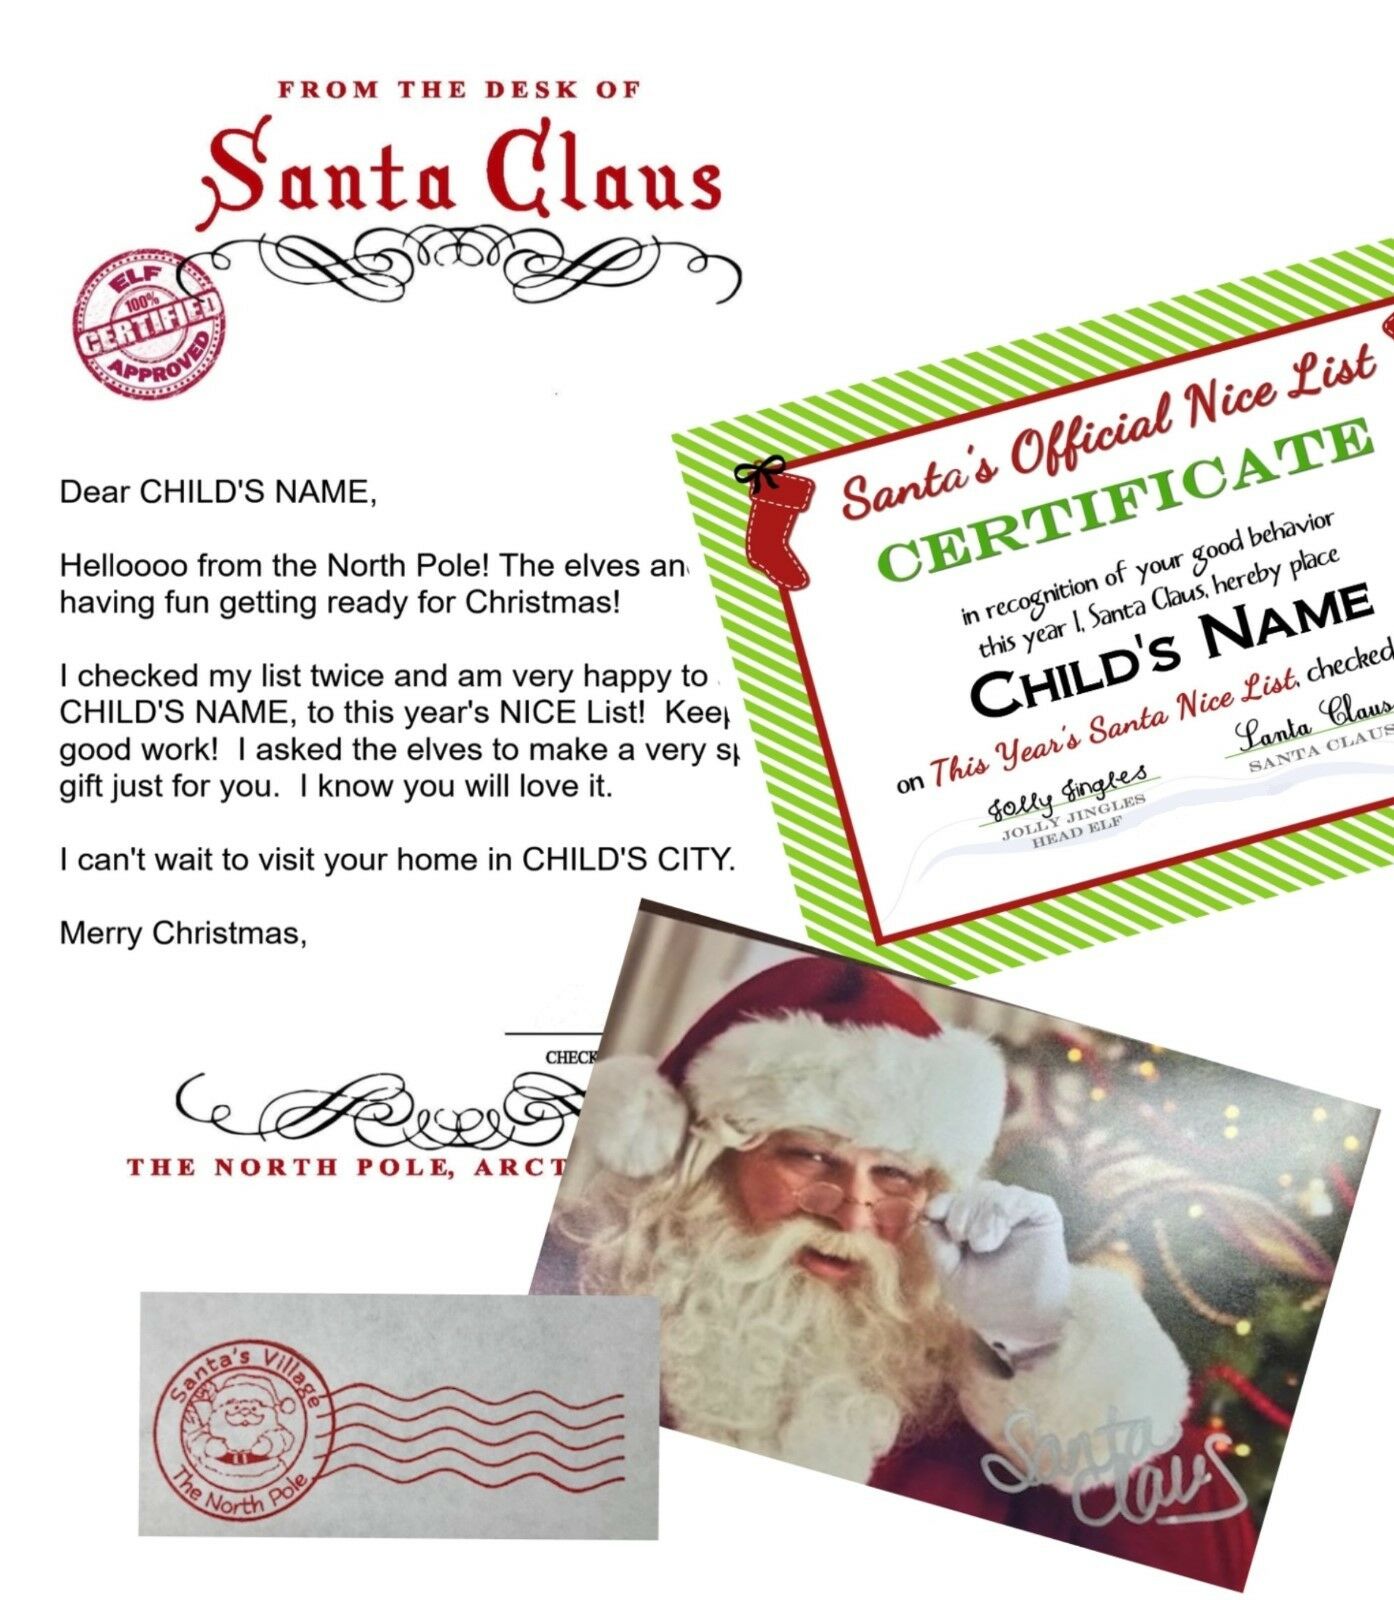 Personalized Letter From Santa With “nice List” Certificate & Autographed Photo!